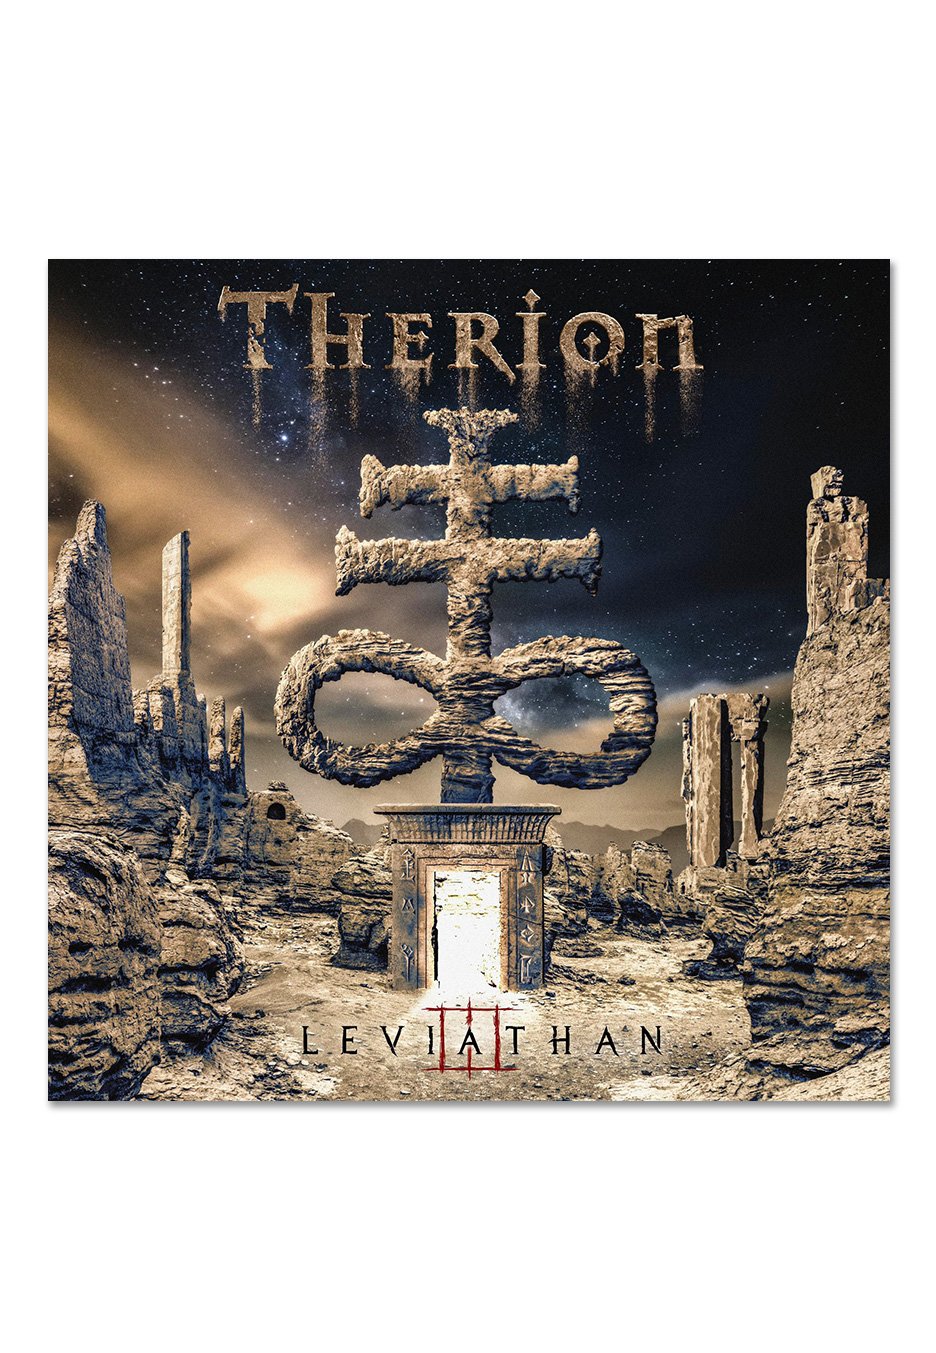 Therion - Leviathan III - 2 Vinyl